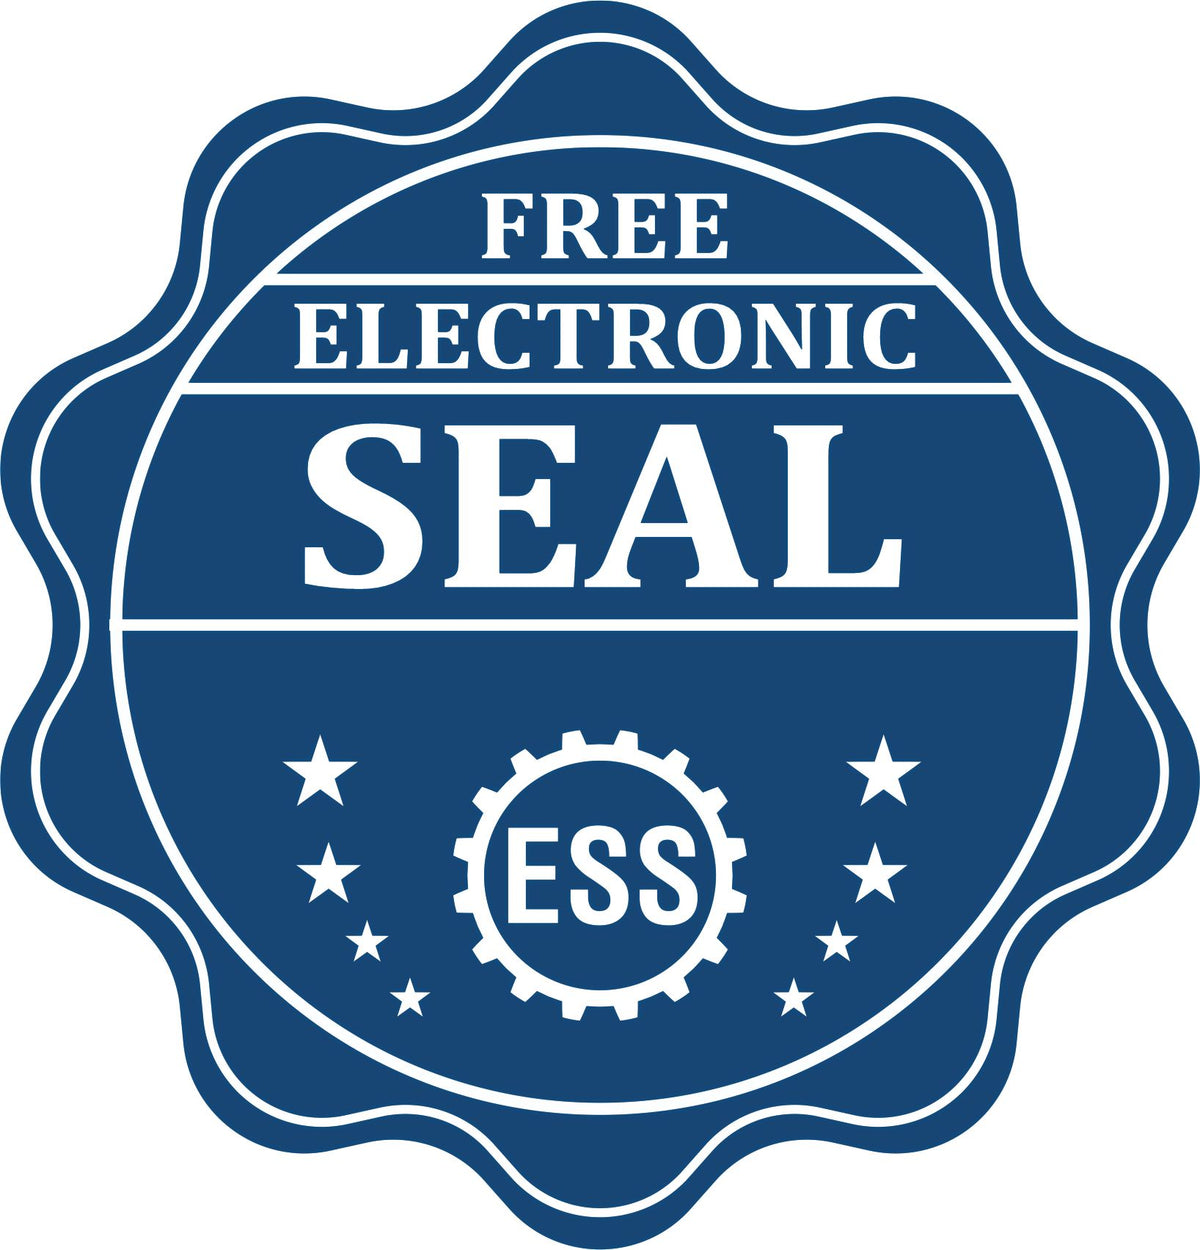 A badge showing a free electronic seal for the Slim Pre-Inked Rectangular Notary Stamp for Pennsylvania with stars and the ESS gear on the emblem.